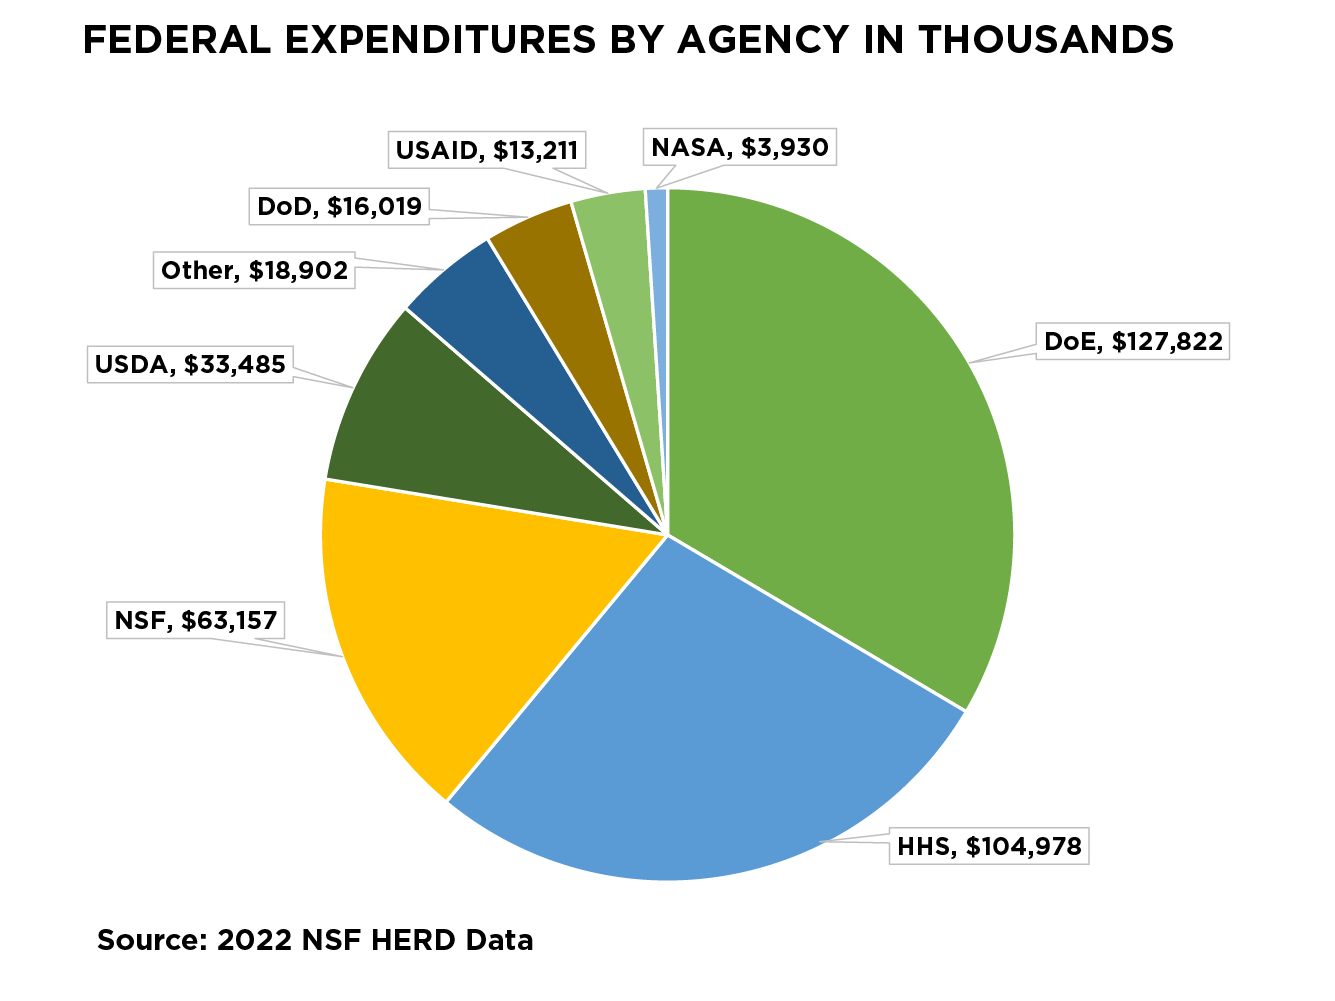 Federal expenditures by agency in thousdands